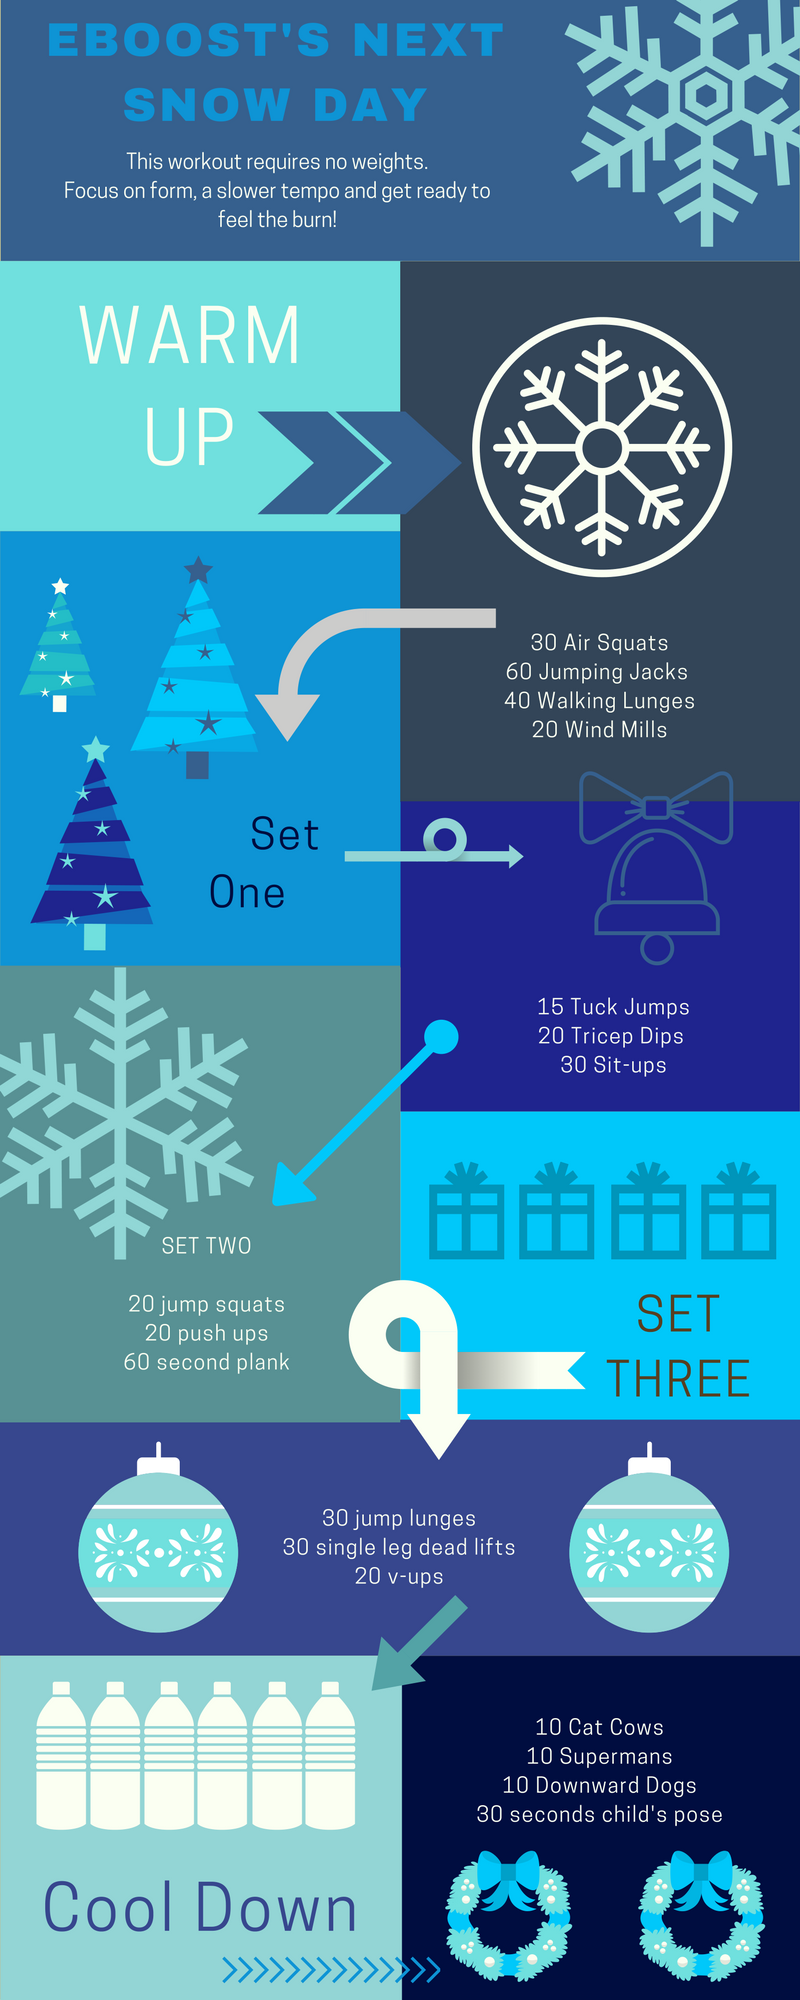 snow-day-workout-1